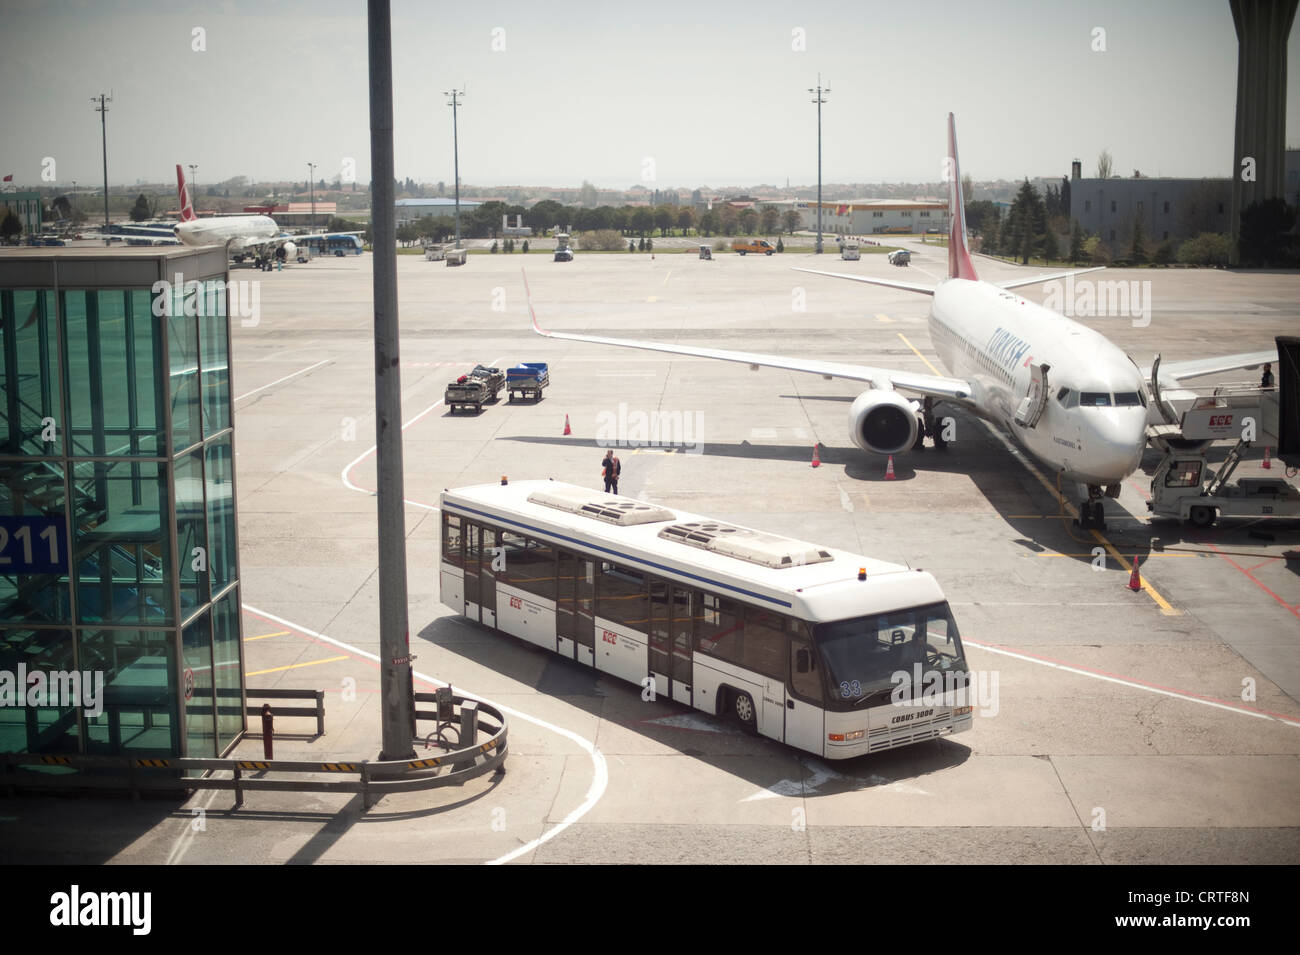 Viewpoint of Istanbul airport shot in an artistic composition. Stock Photo